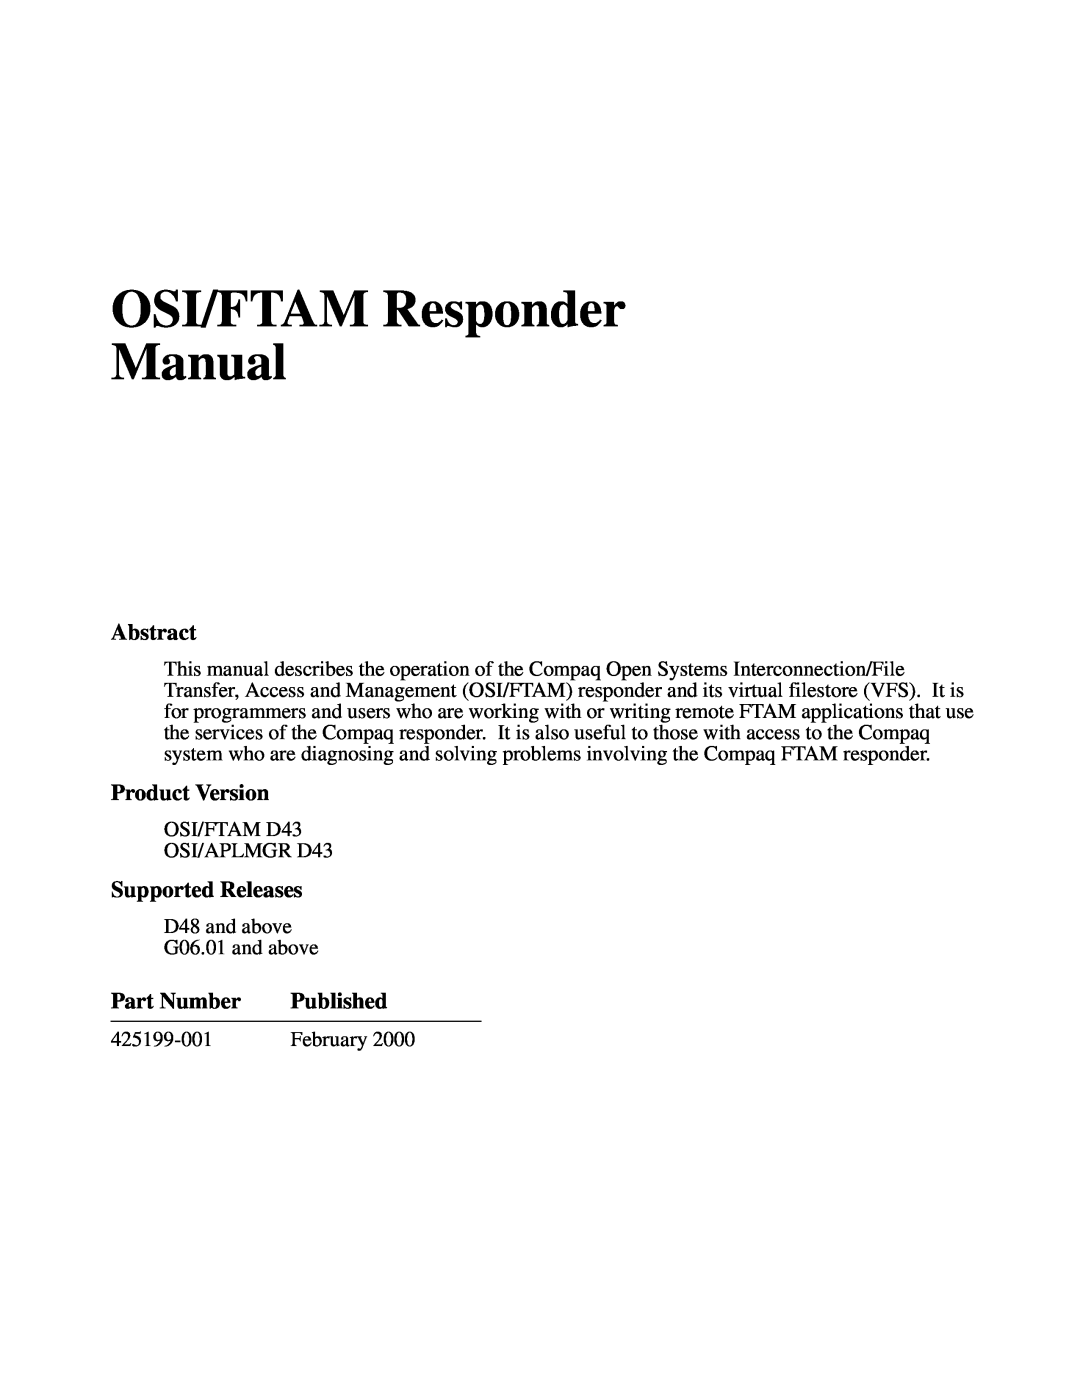 Compaq OSI/FTAM D43 manual Abstract, Product Version, Supported Releases, Part Number, Published, 425199-001, February 